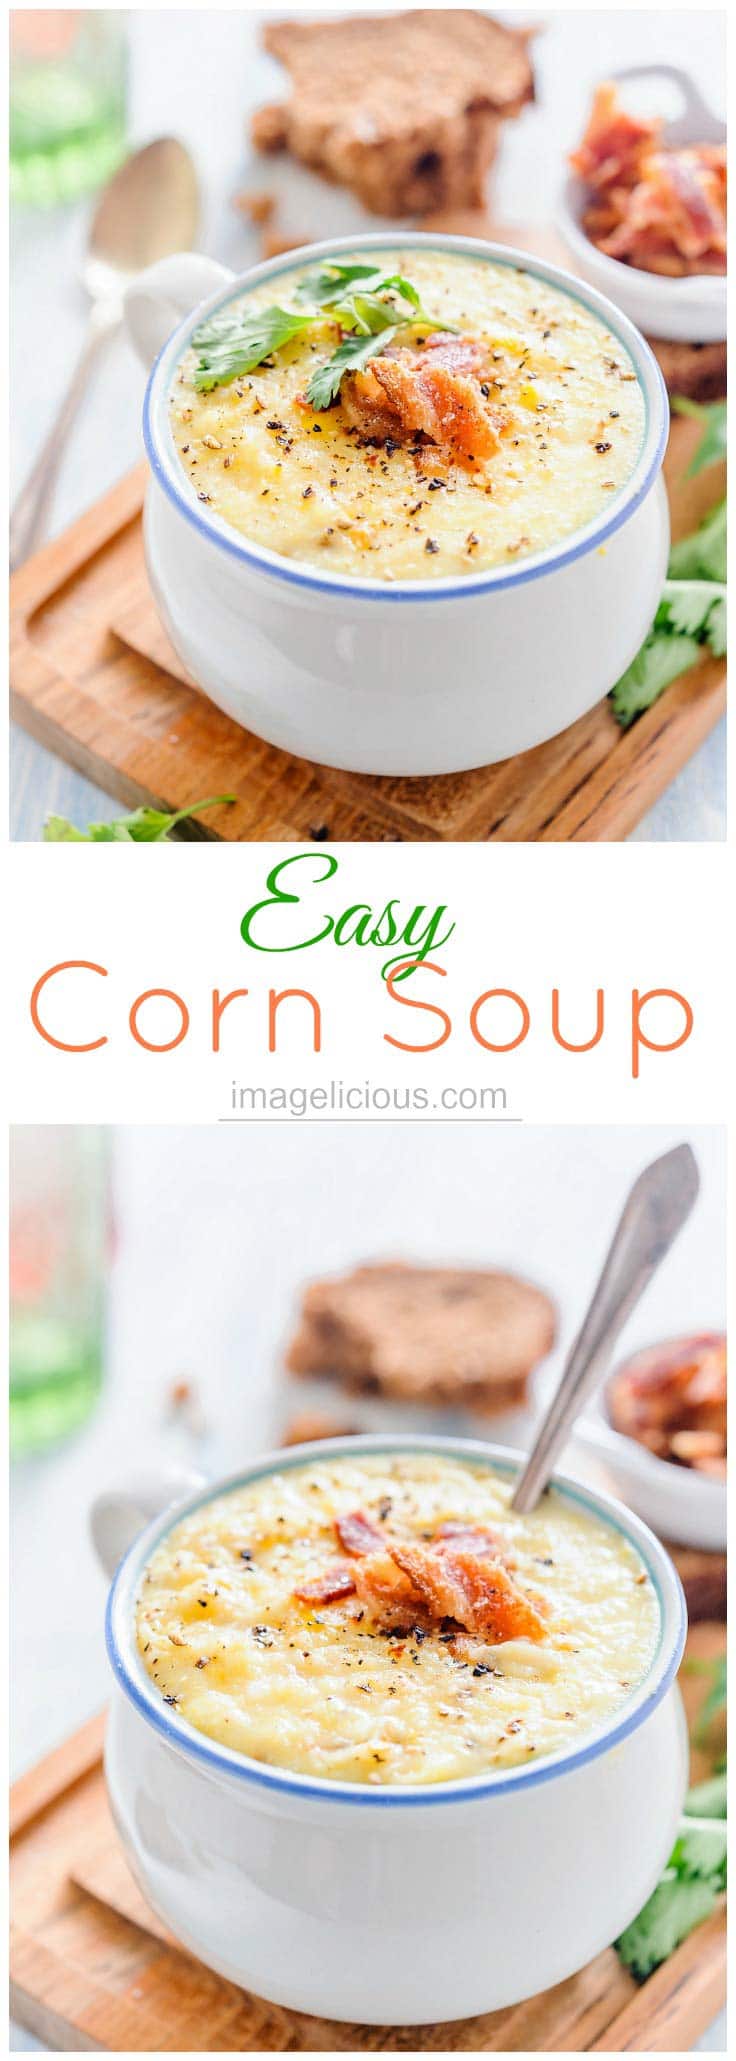 Easy Corn Soup can be made with both fresh or frozen corn for convenience. It's sweet, creamy, and delicious. Naturally gluten free and can be easily modified to be vegan. Cooked in a matter of minutes | Imagelicious